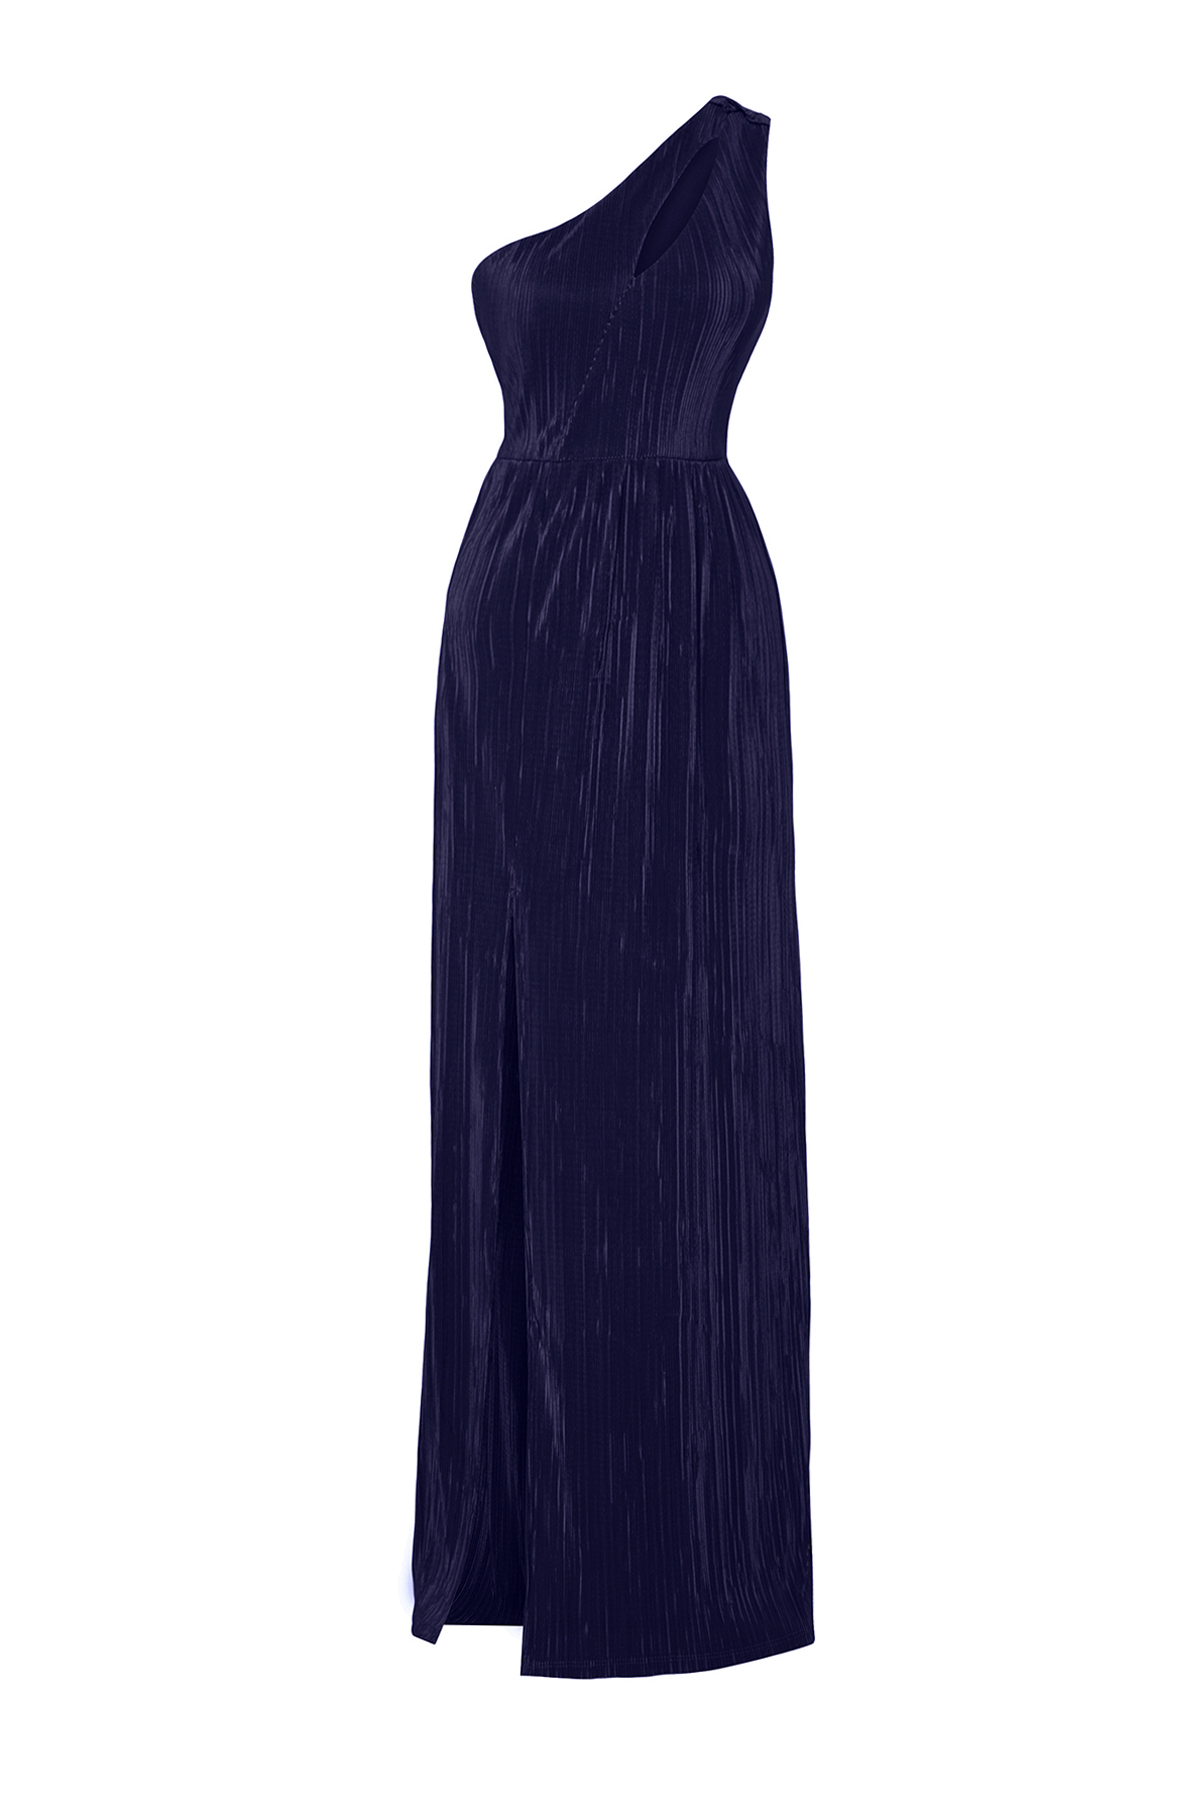 Trendyol Navy Blue Knitted Lined Long Evening Dress